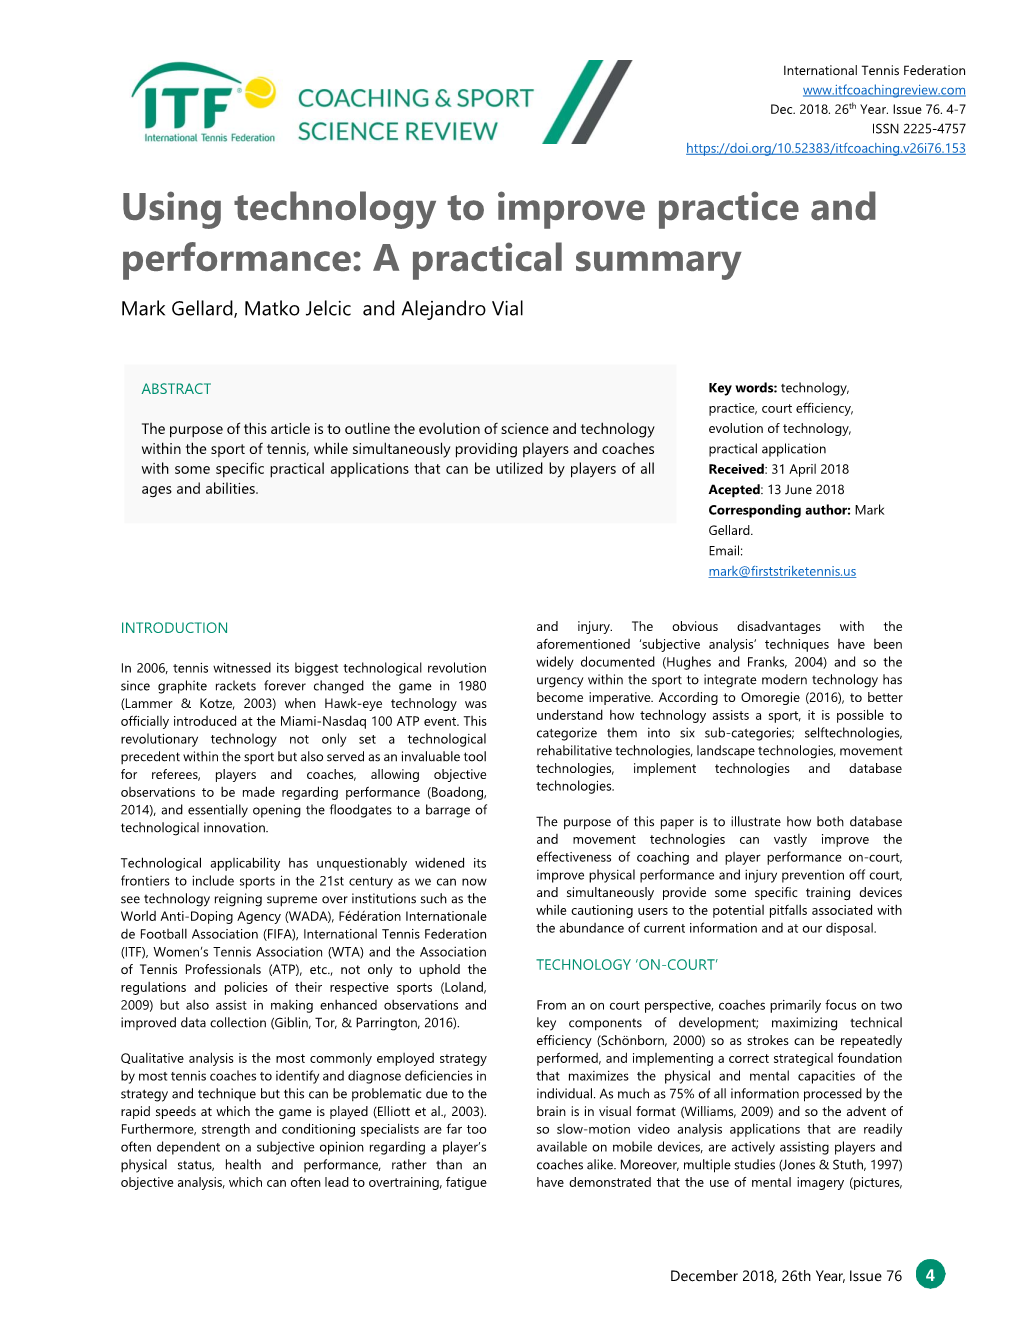 Using Technology to Improve Practice and Performance: a Practical Summary